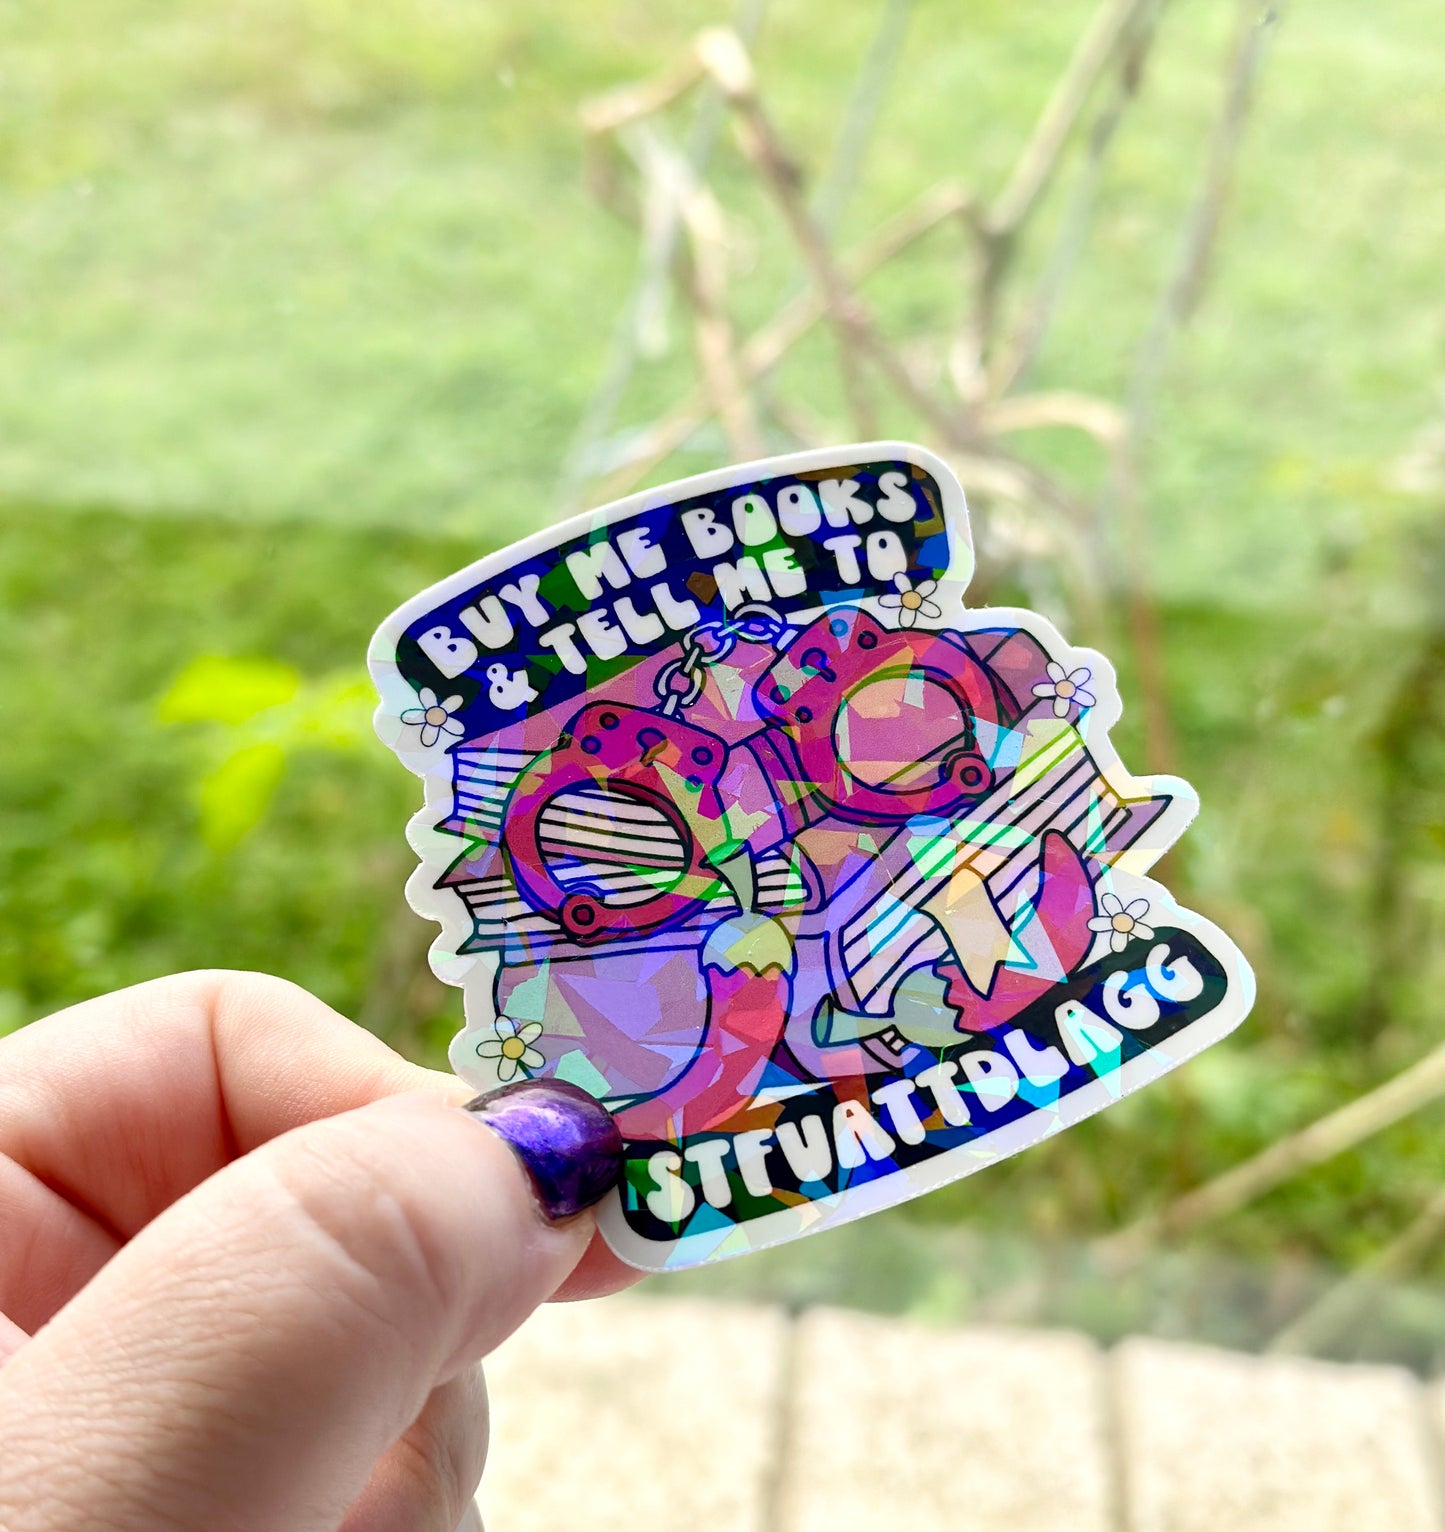 Buy me books and tell me to STFUATTDLAGG - Holographic Vinyl Sticker